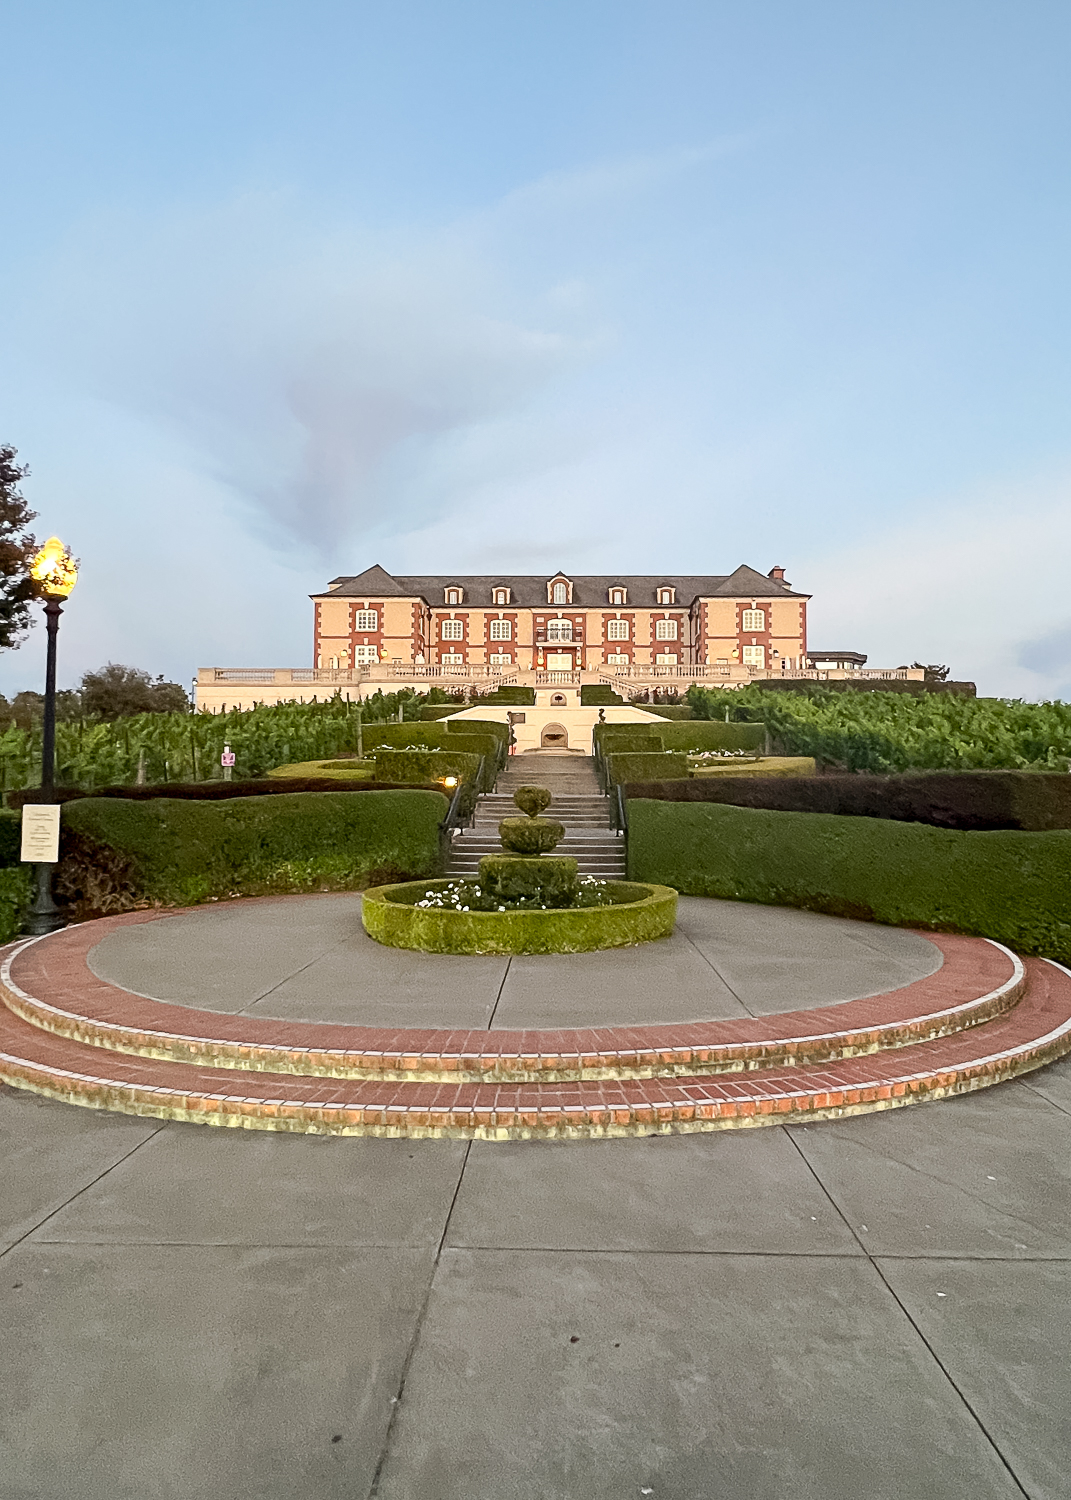 Pacific Globetrotters, budget family travel blog, shares their trip 48 hours in Napa. Domaine Carneros